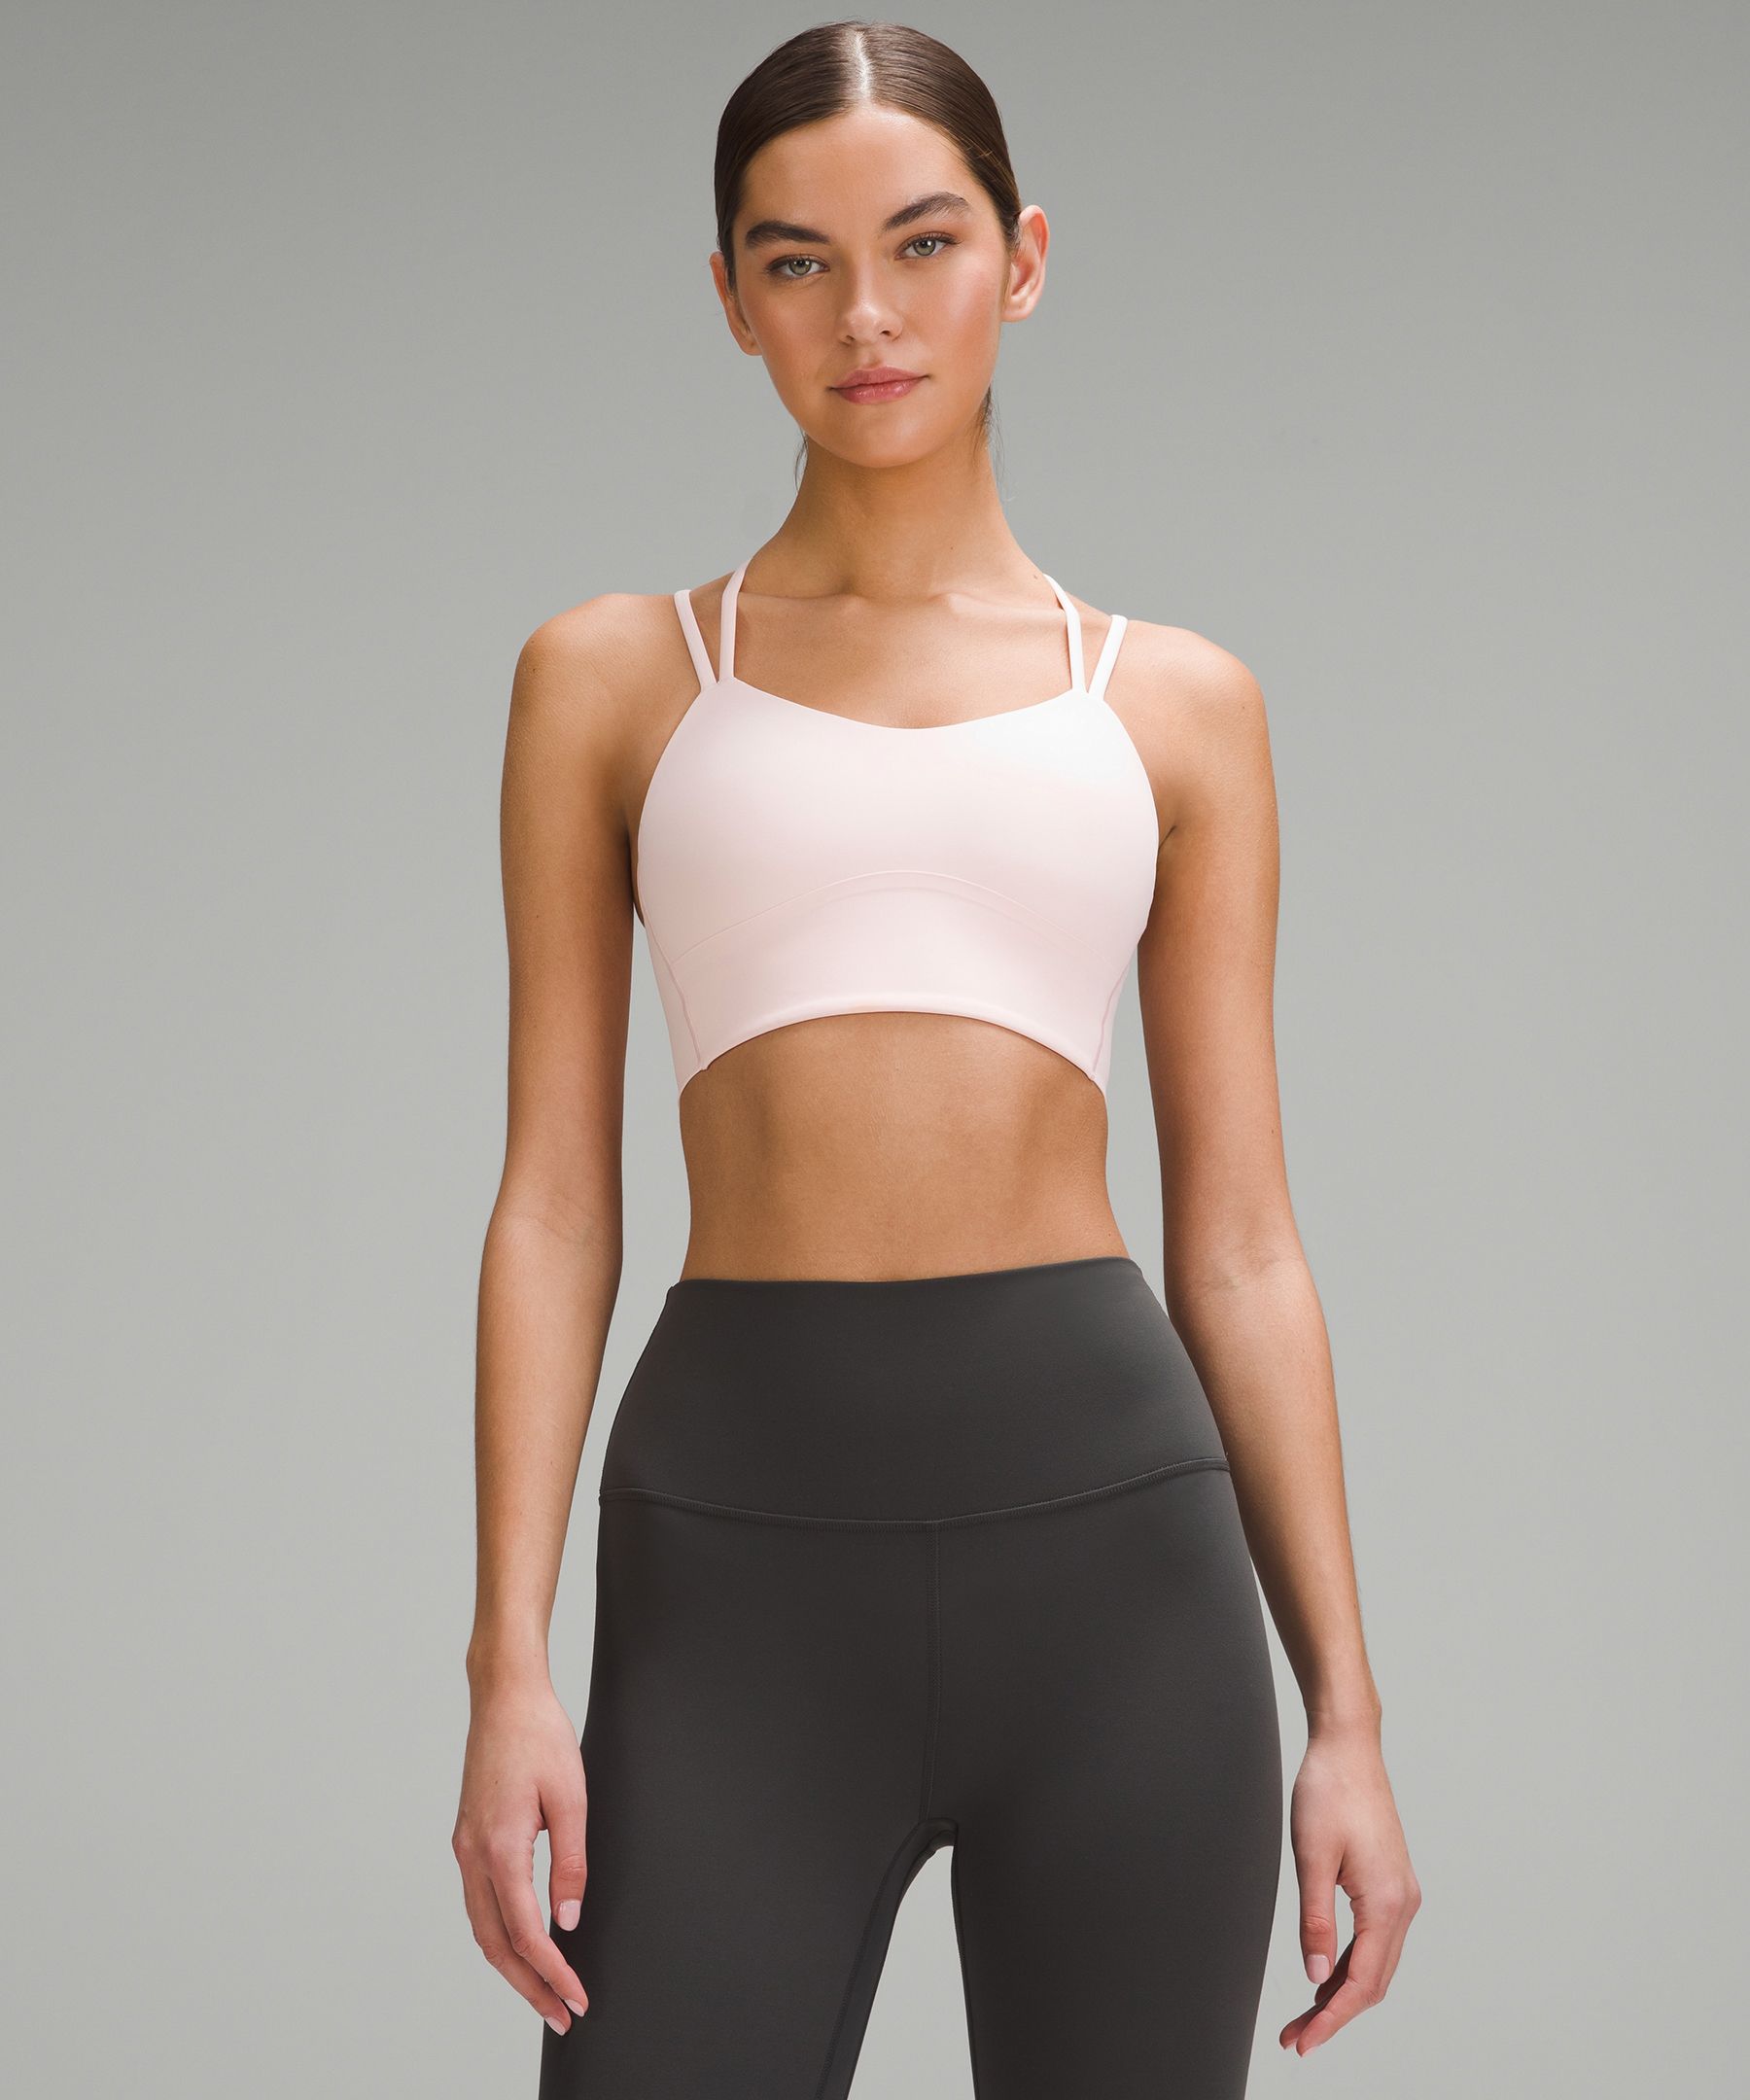 Lululemon All Day Breeze Bra Blue Size 6 - $30 (53% Off Retail) - From  Olivia